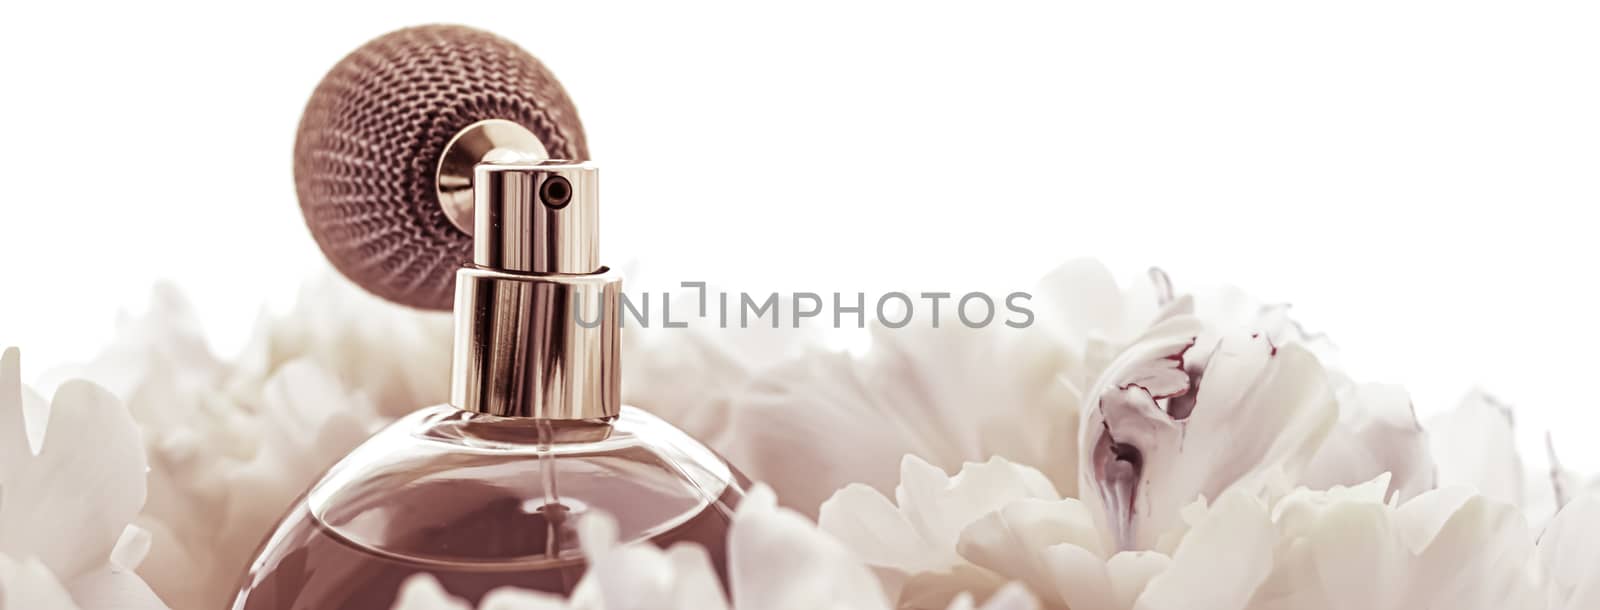 Retro fragrance bottle as luxury perfume product on background of peony flowers, parfum ad and beauty branding by Anneleven